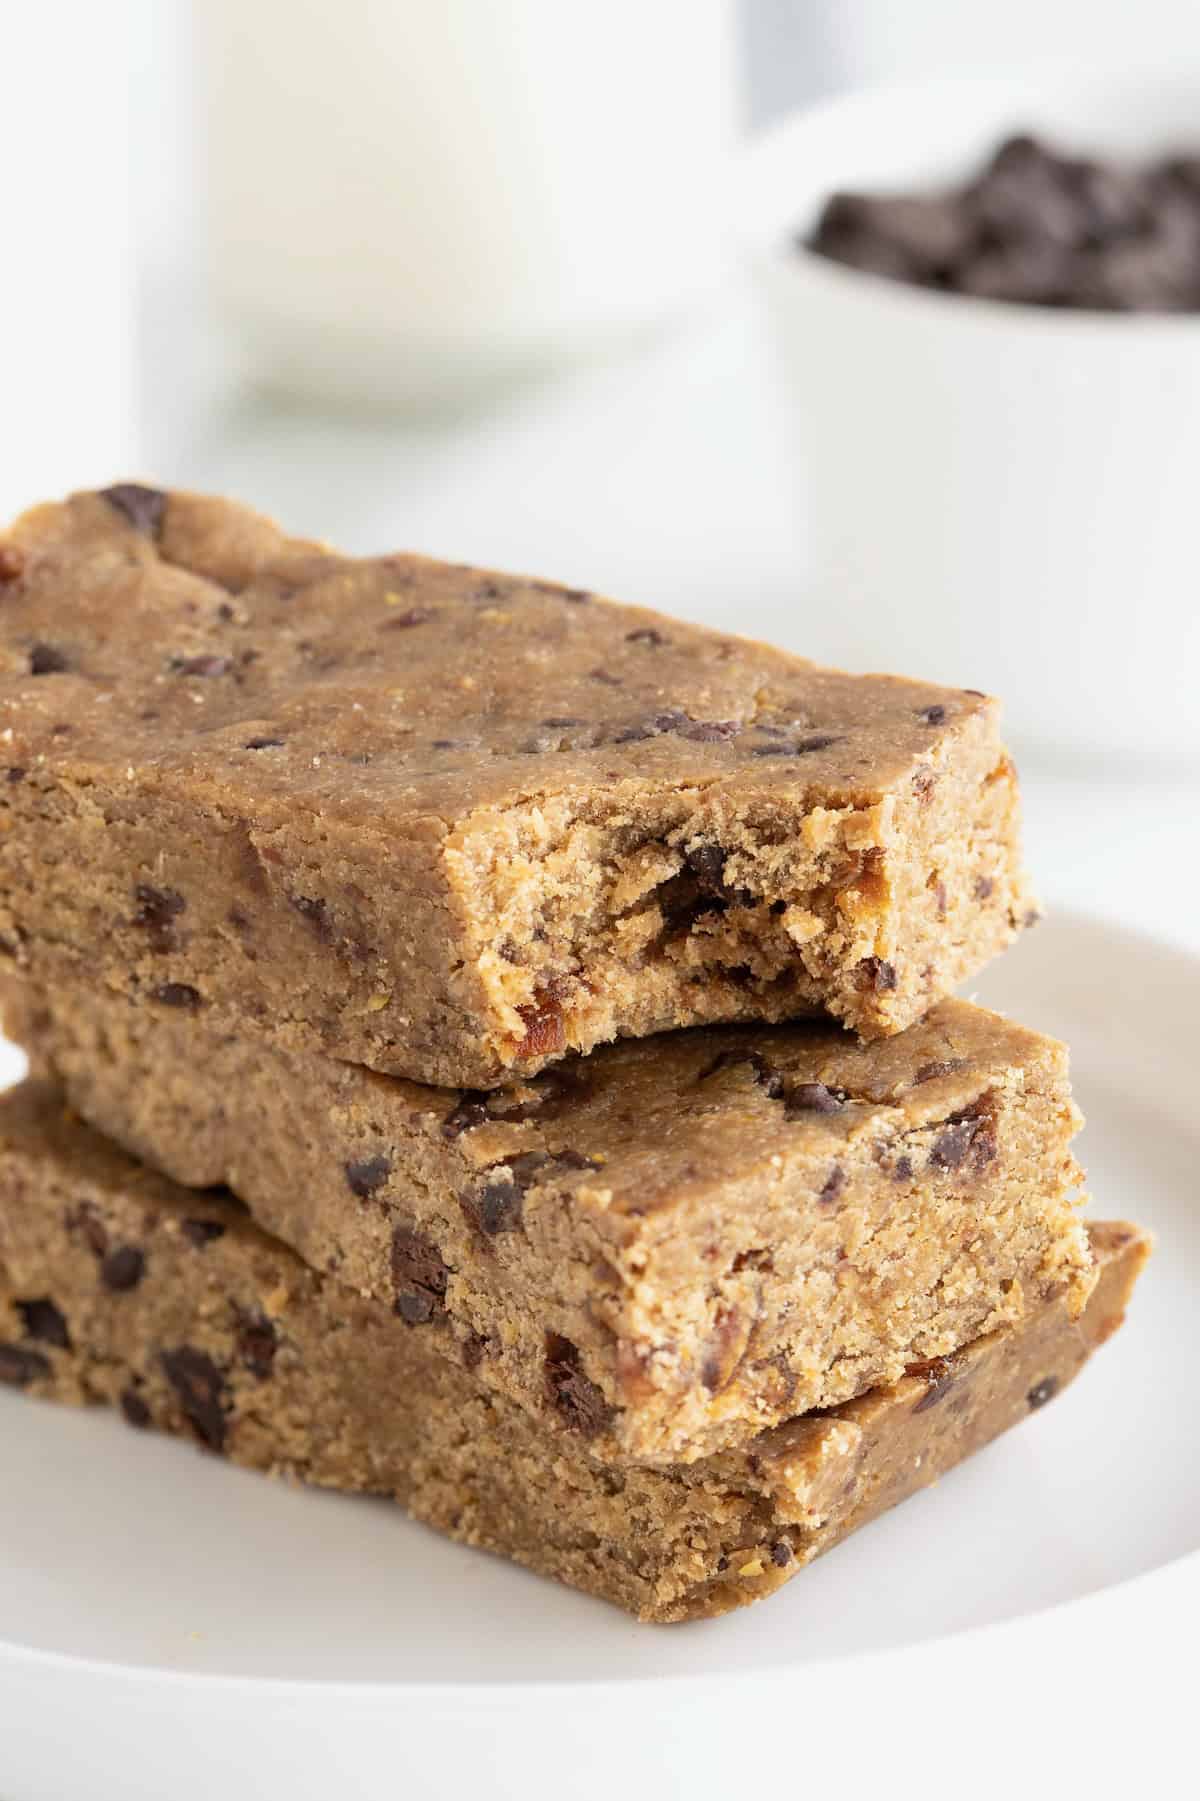 A stack of three peanut butter chocolate chip breakfast bars on a small white plate. The top bar has a bite out of it.